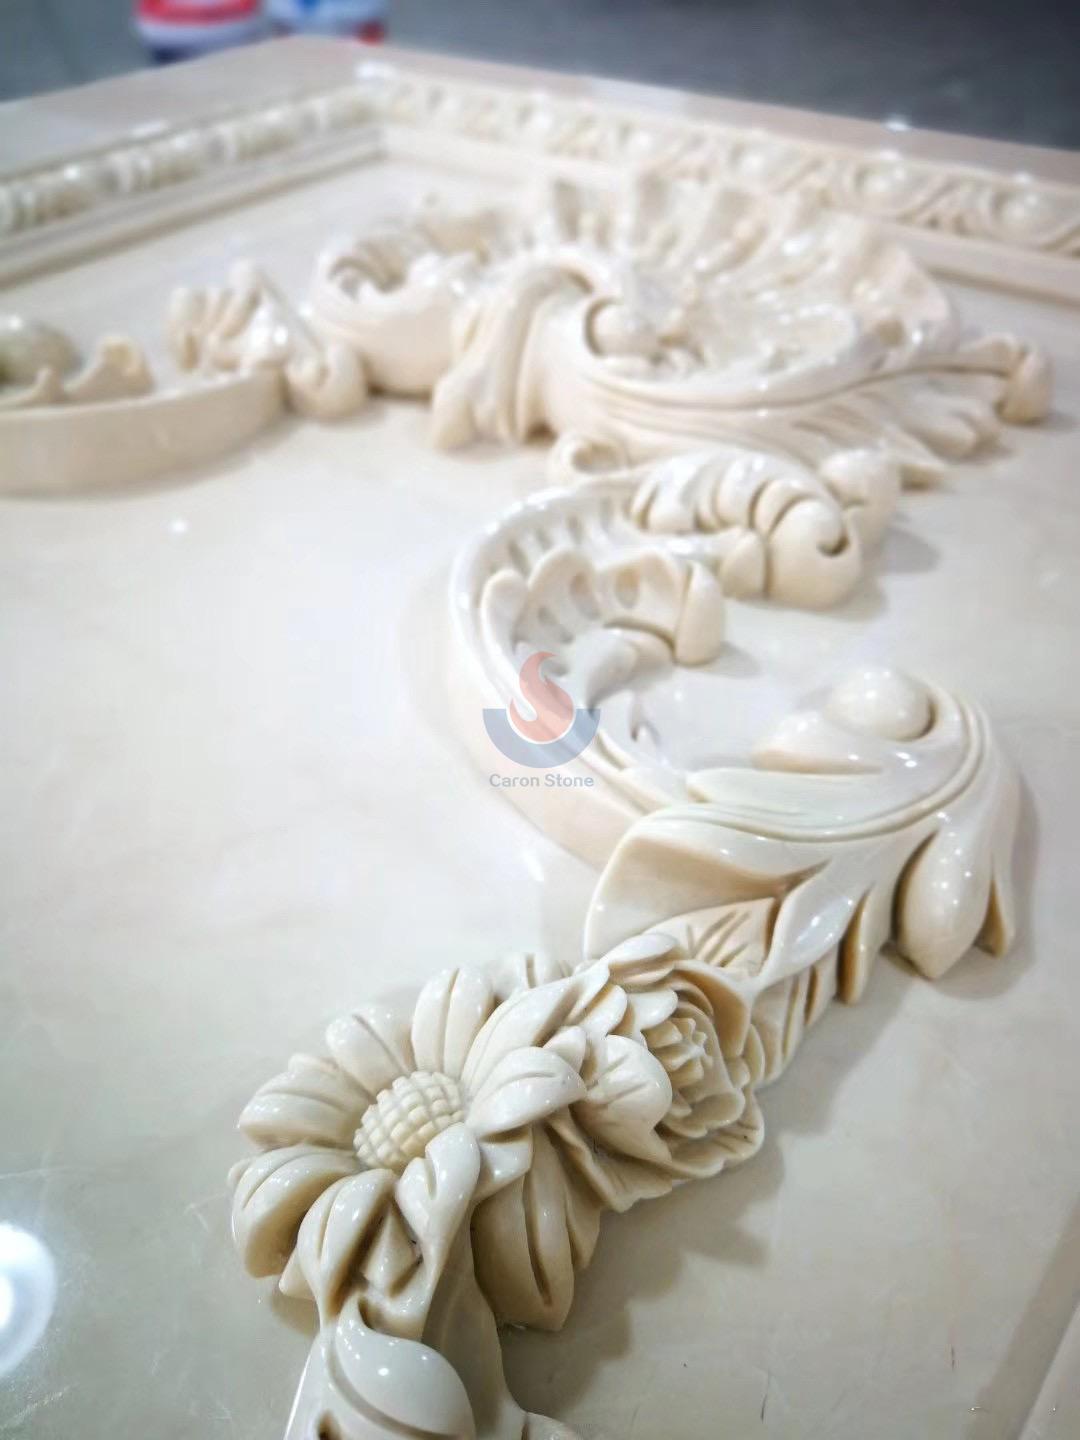 Marble carving flowers